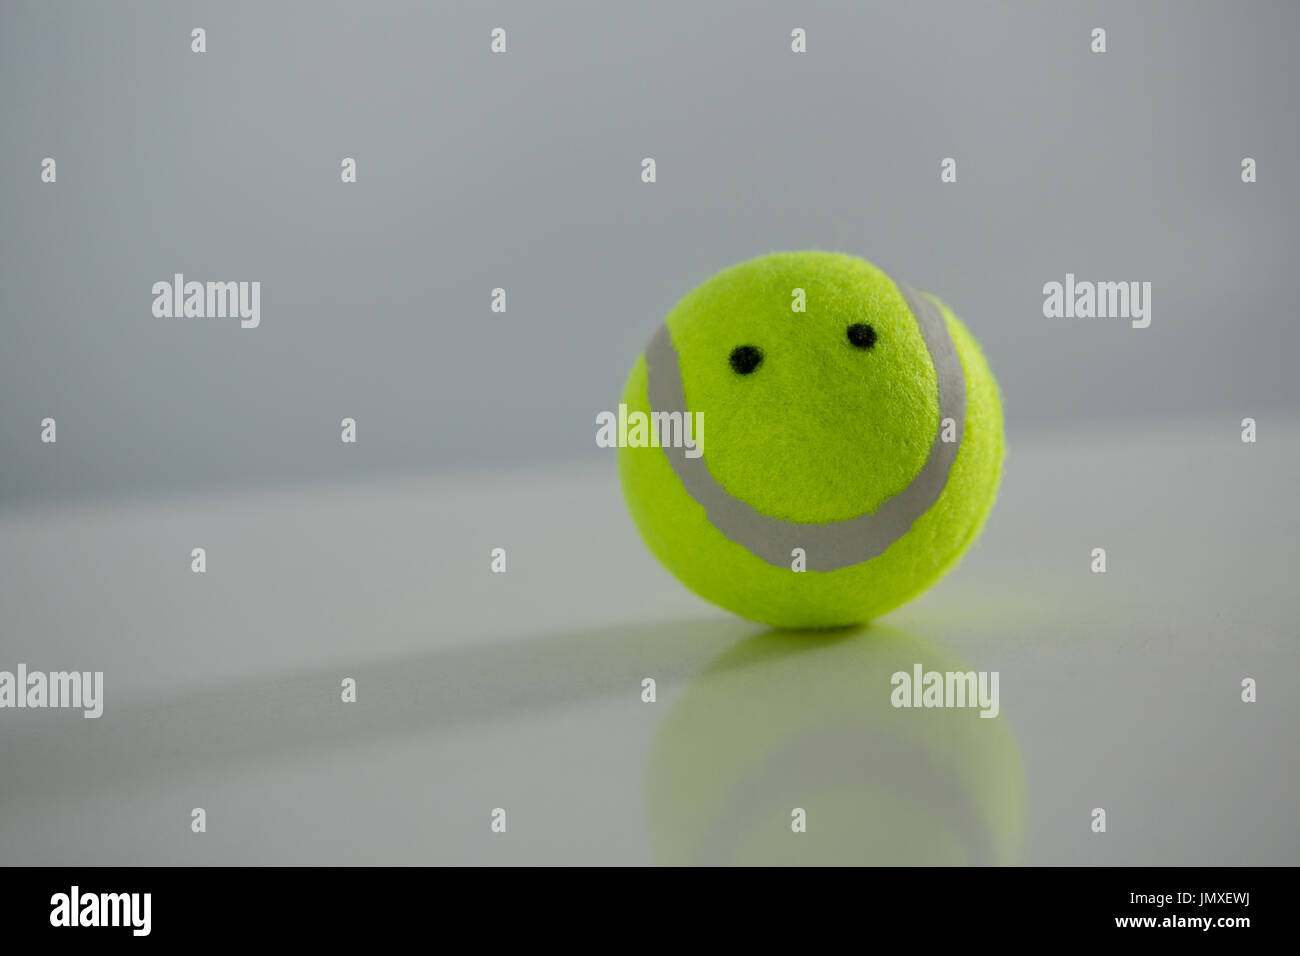 Close up of tennis ball with anthropomorphic face against white background Stock Photo